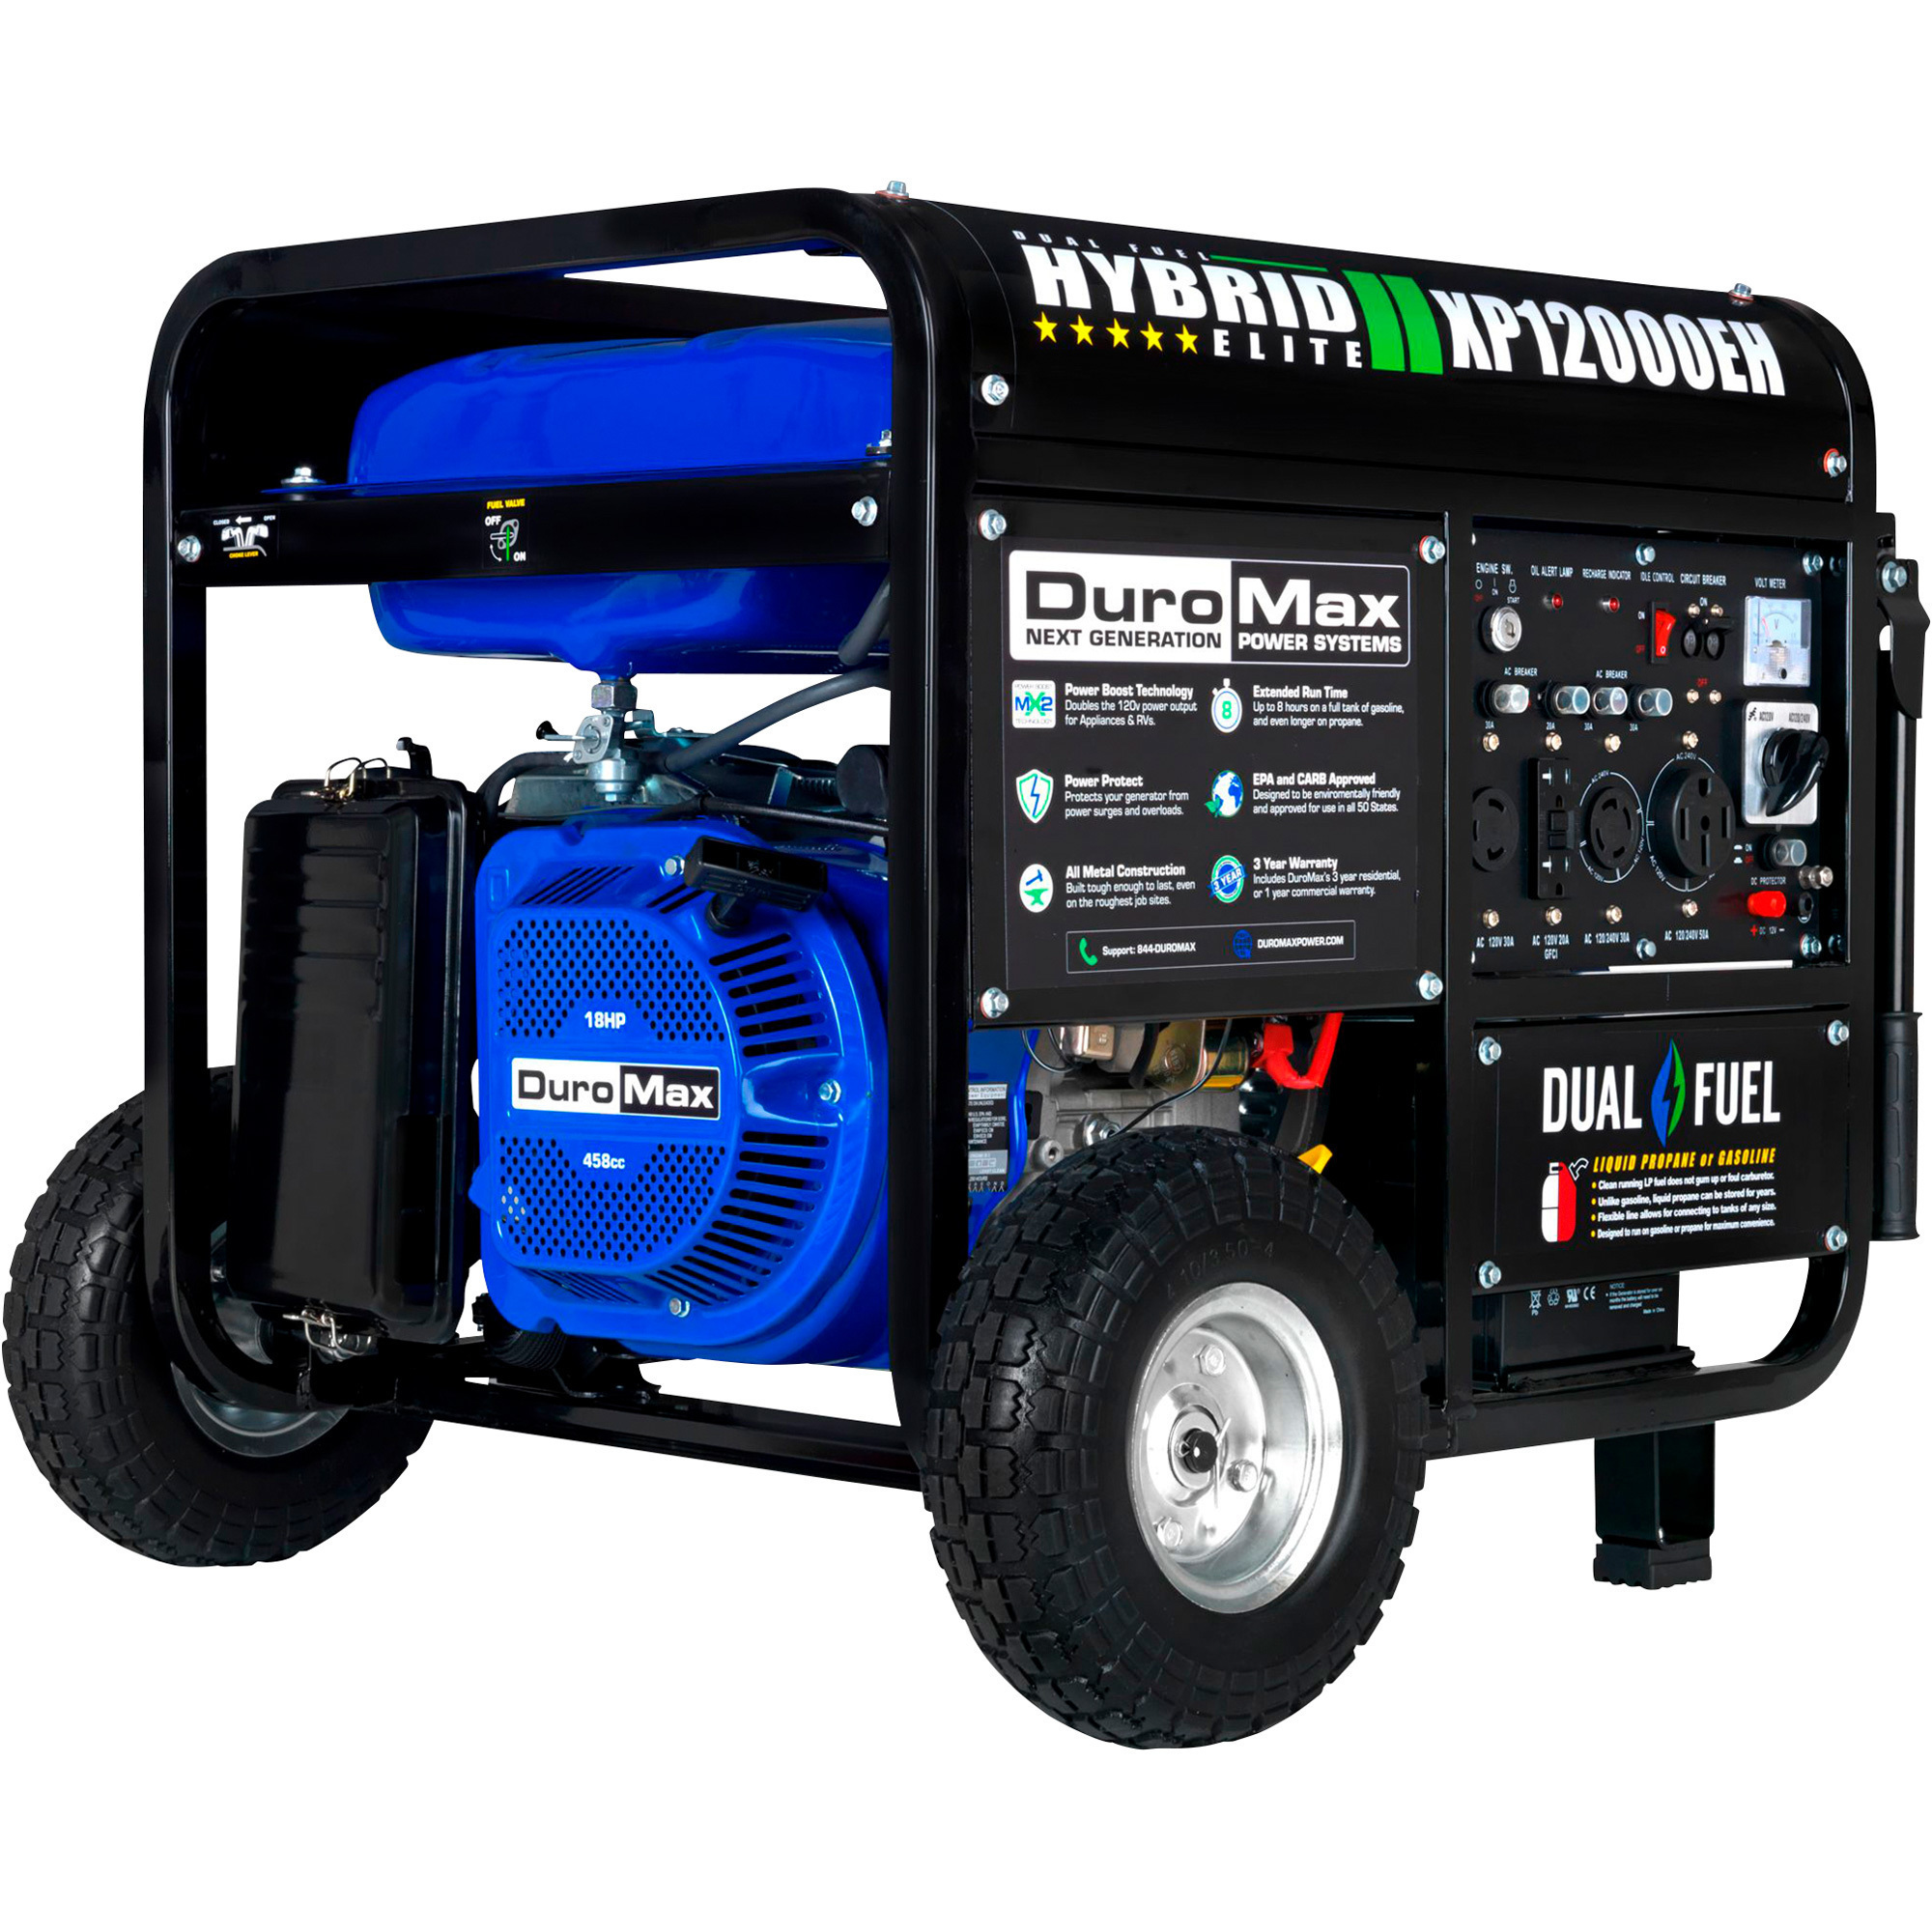 DuroMax Portable Dual Generator — Surge Watts, 9500 Rated Watts, Electric Start, CARB Compliant, Model# XP12000EH | Northern Tool